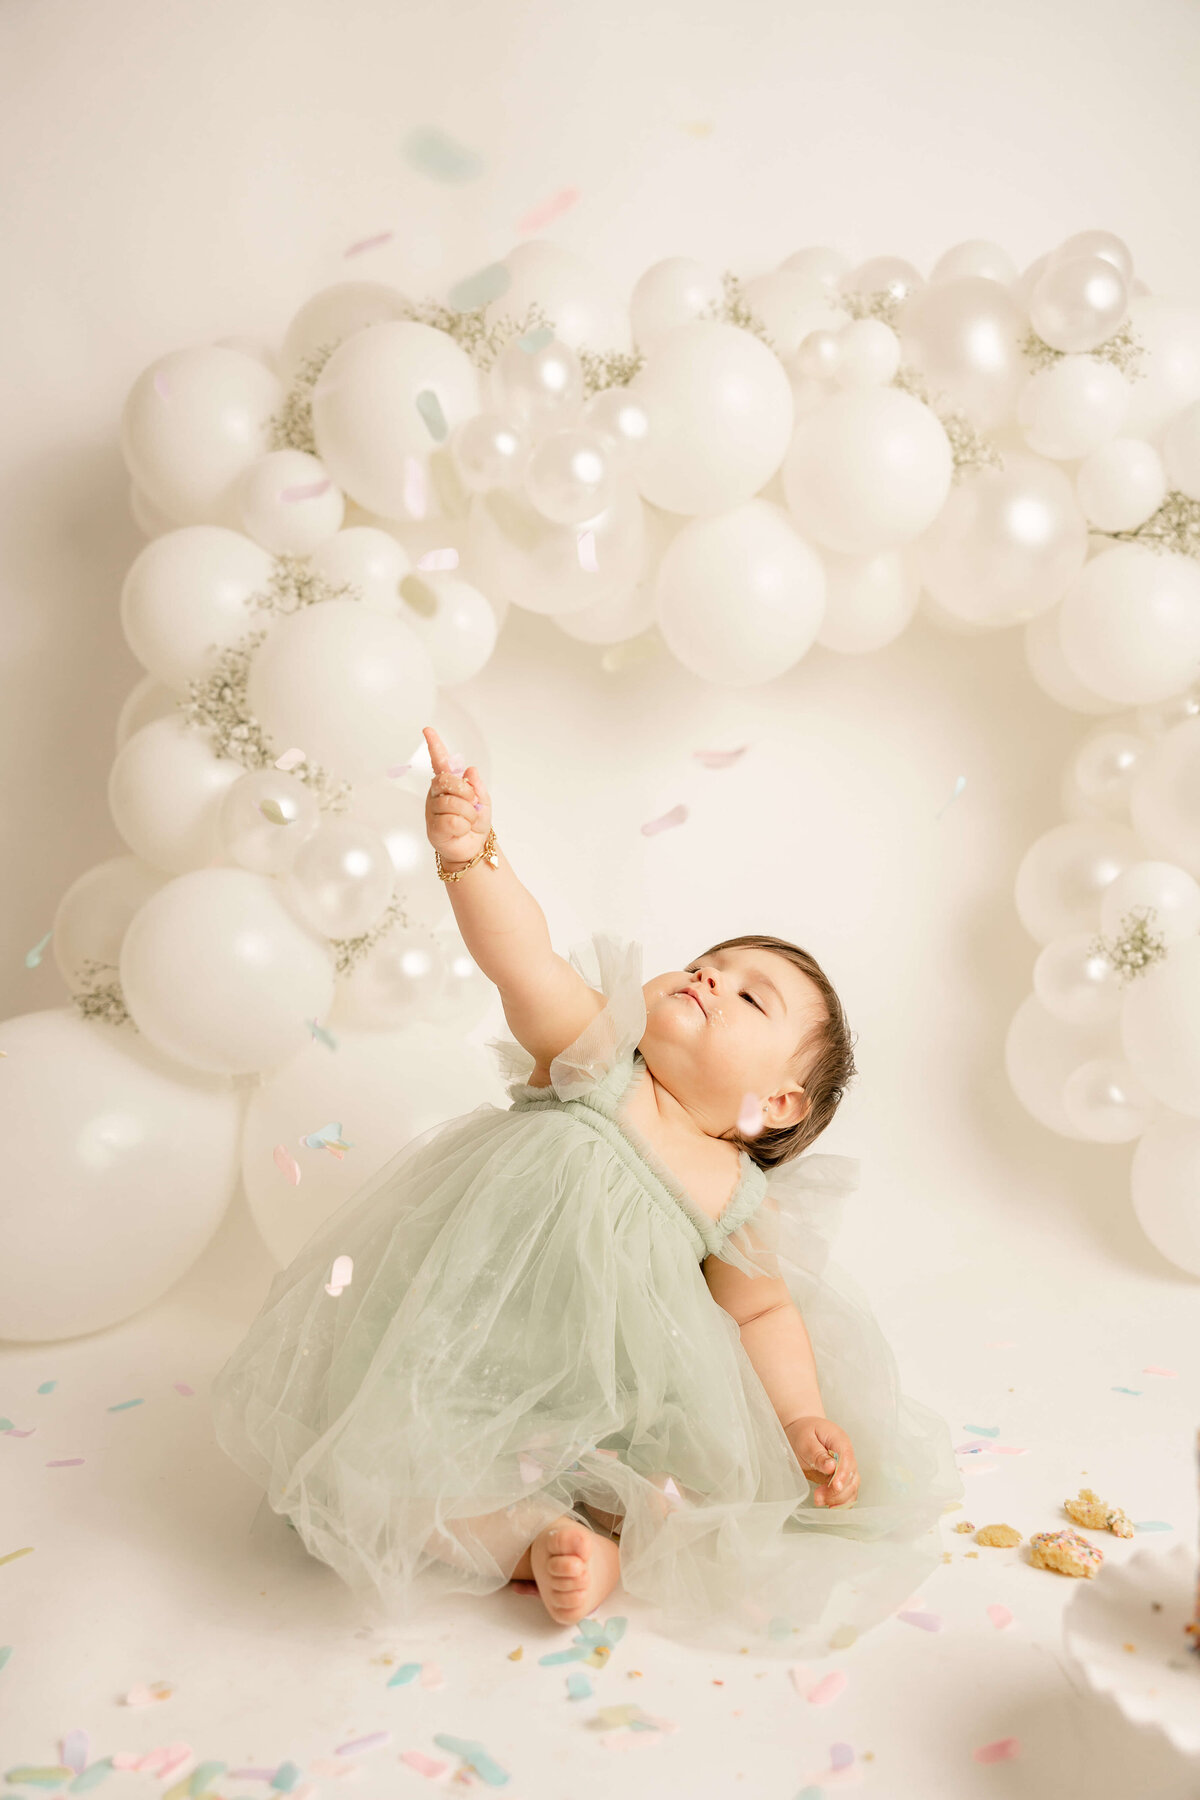 baby girl in green dress pointing at confetti falling in studio mileston picture